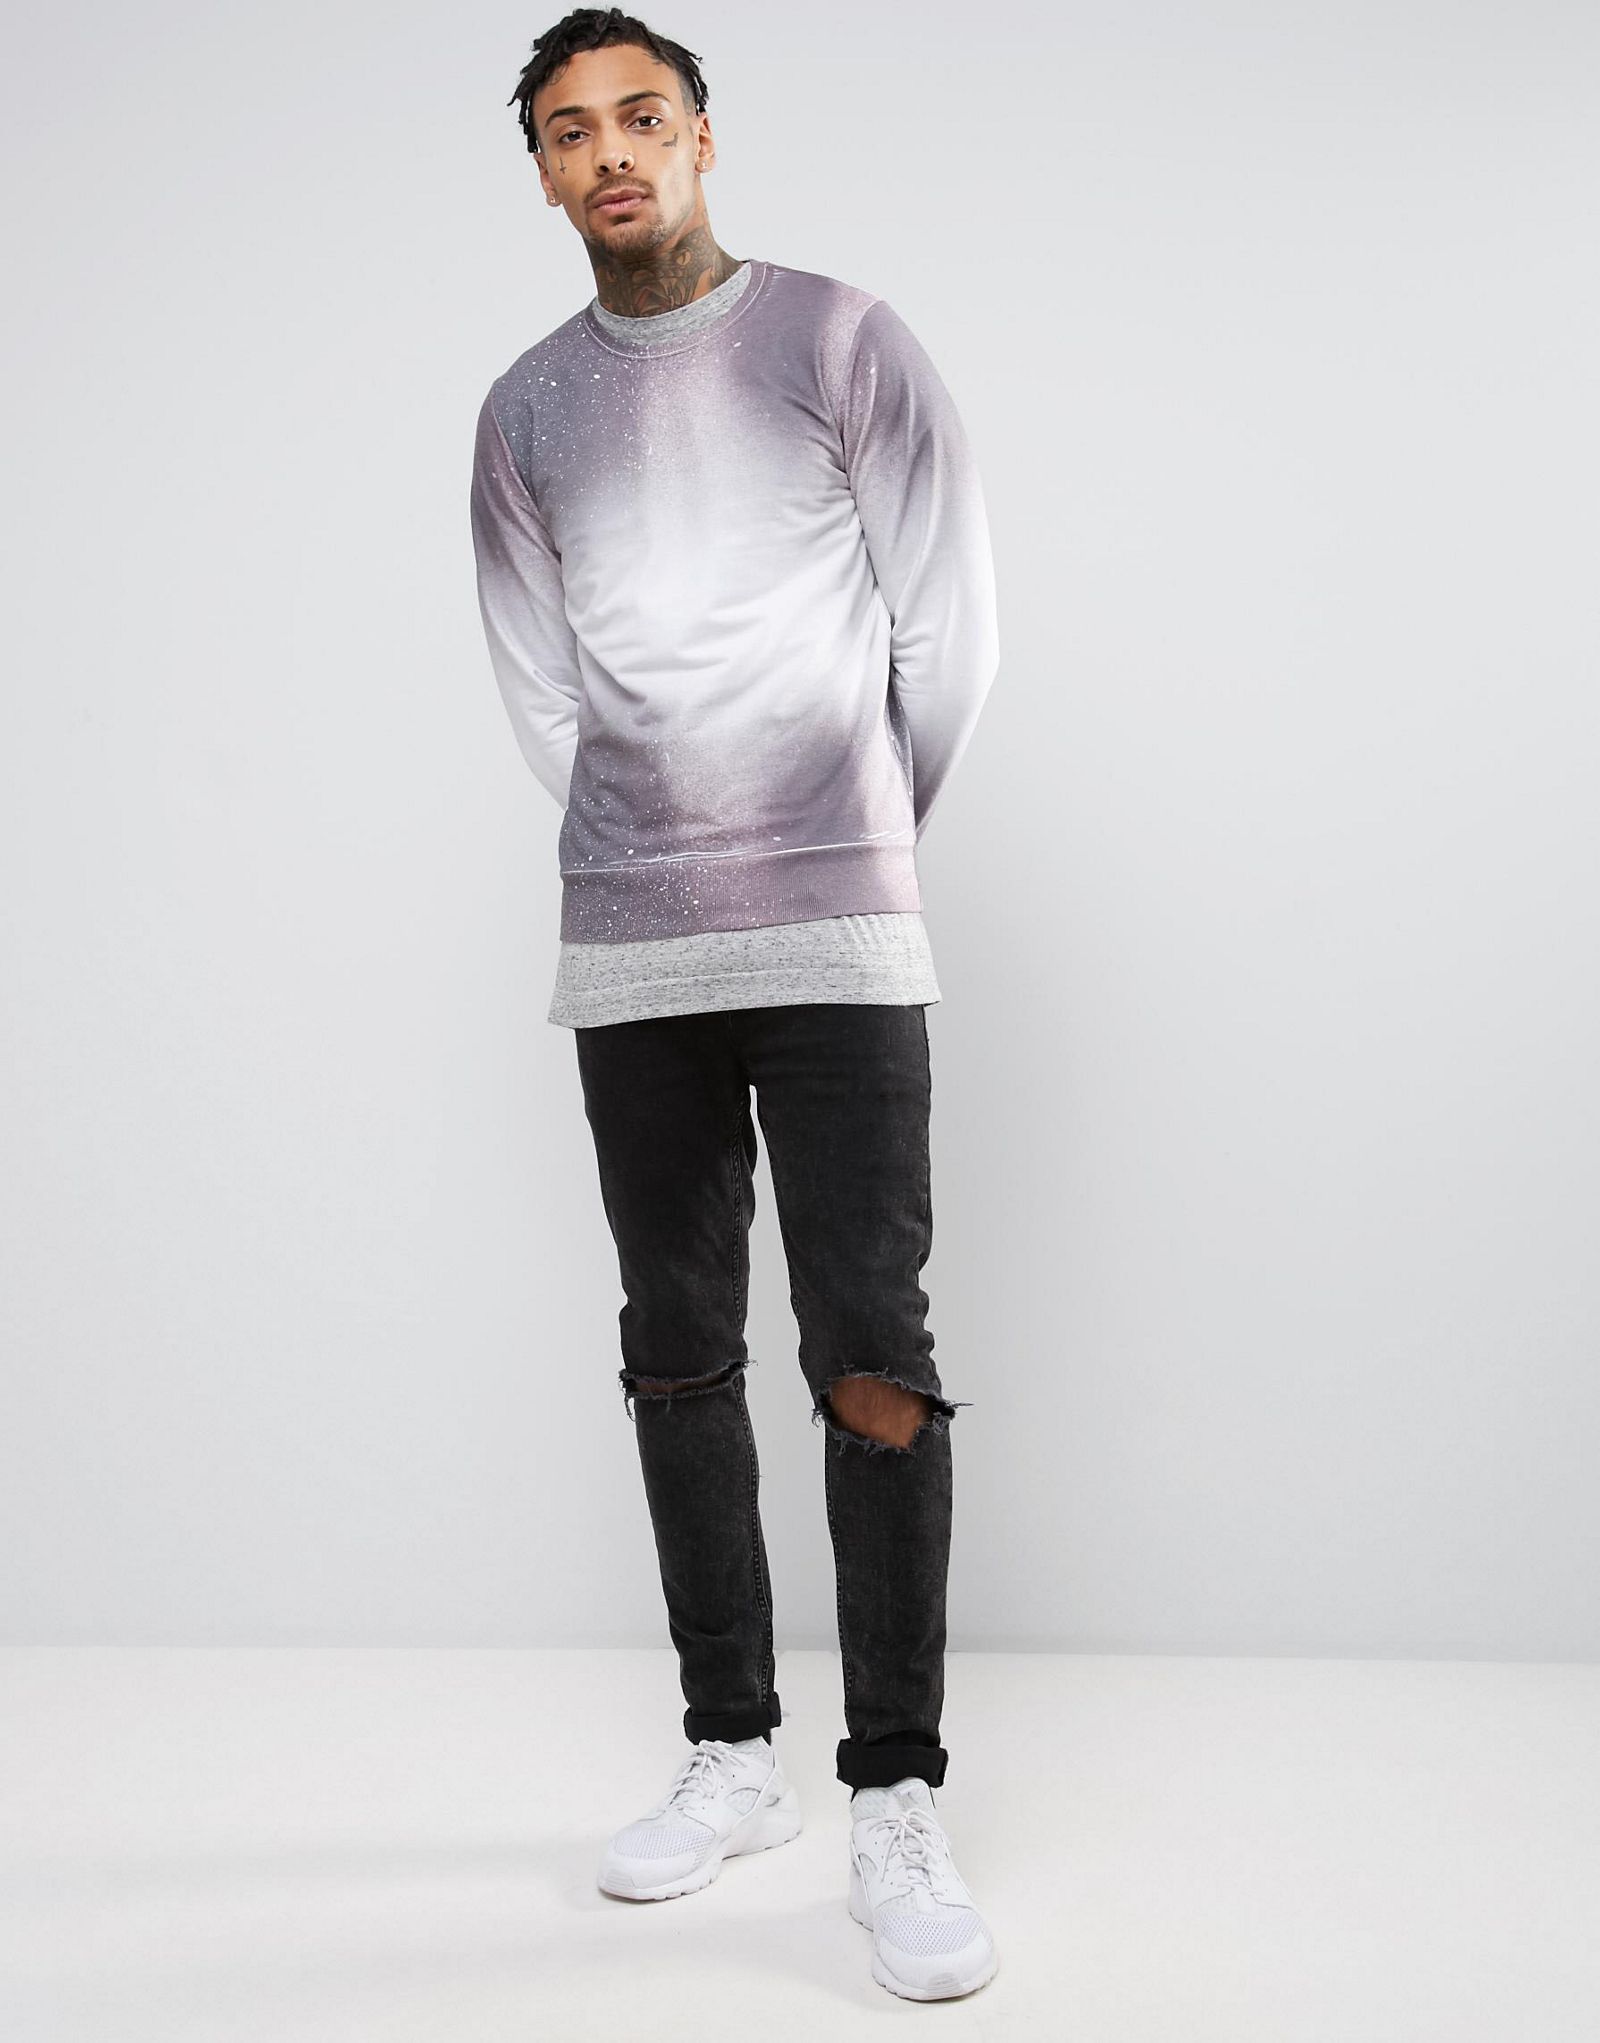 River Island Sweatshirt With Faded Paint Splatter In Purple And White